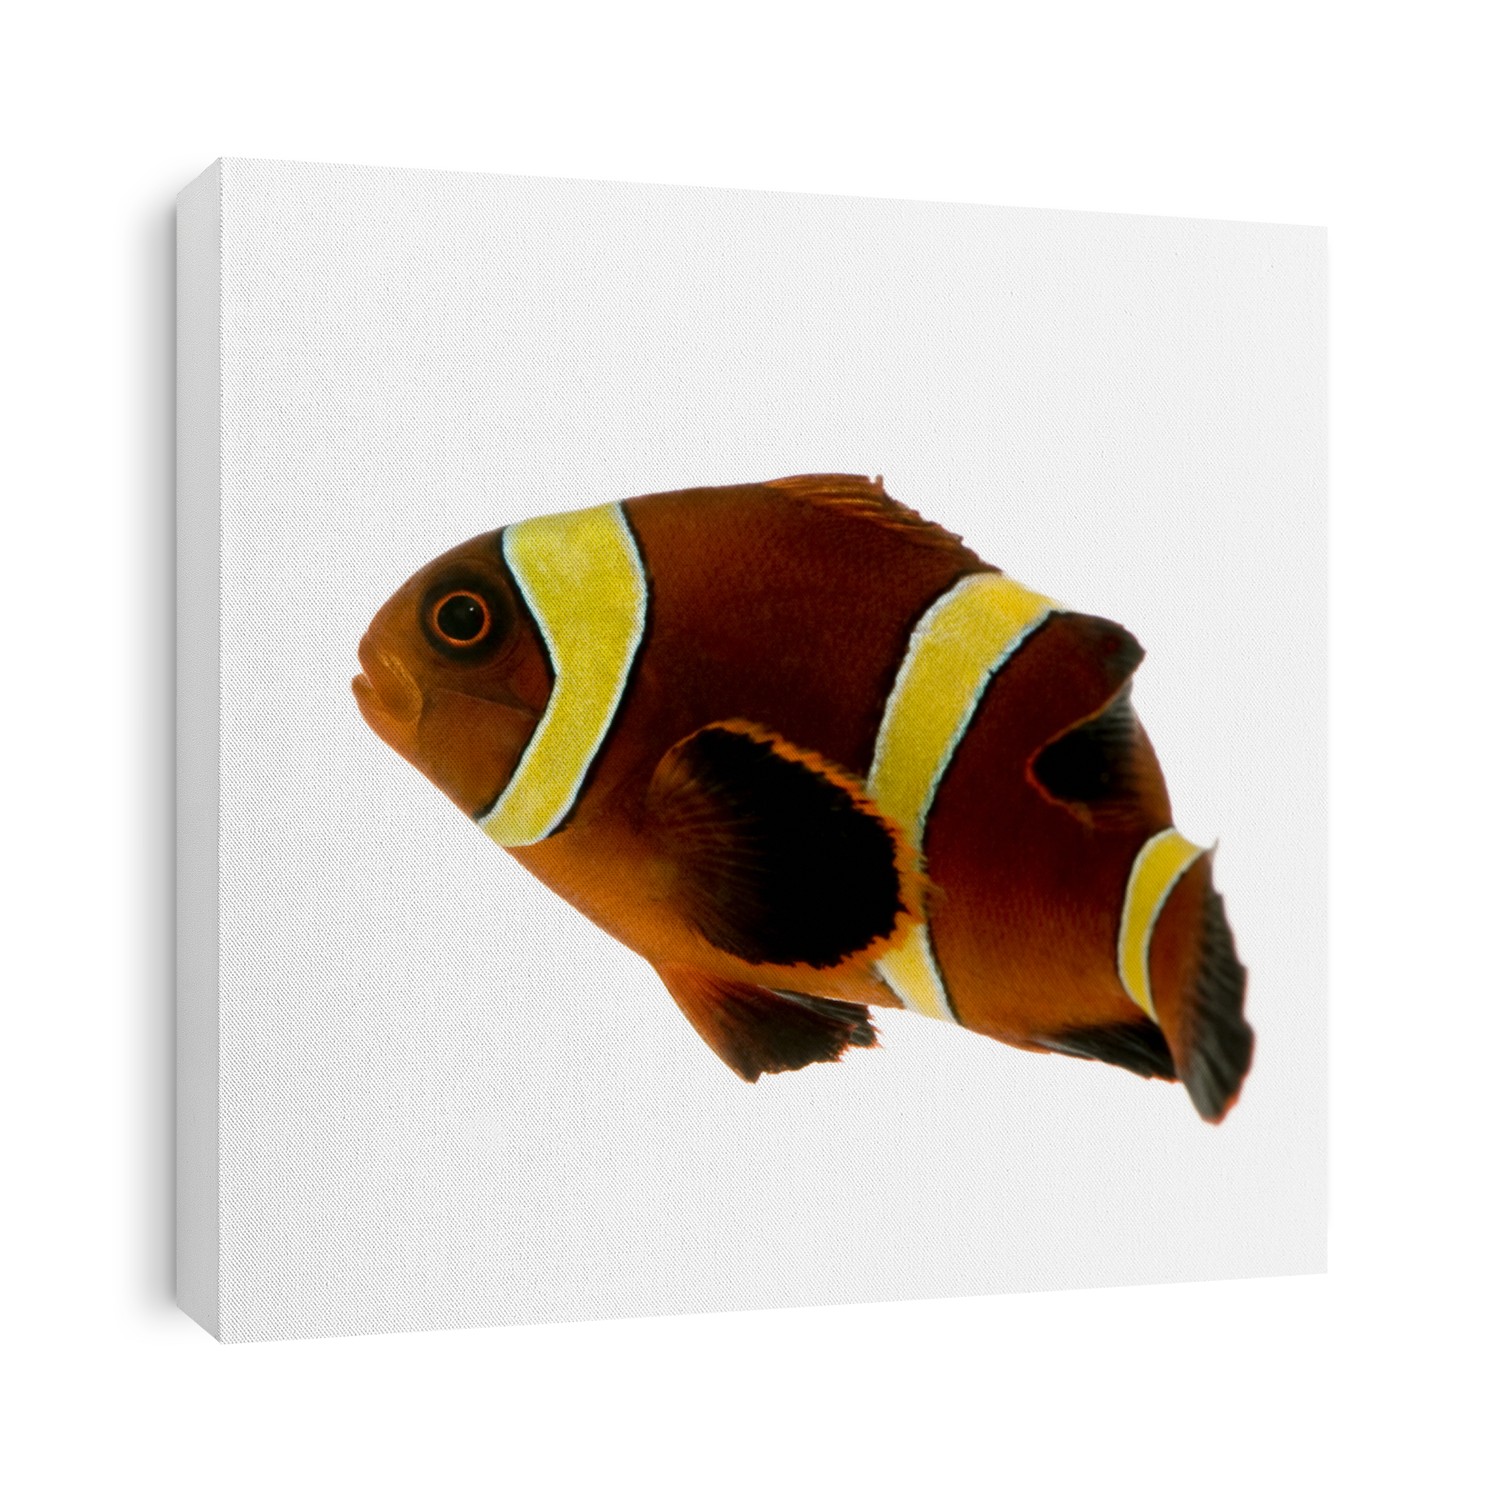 Gold stripe Maroon Clownfish - Premnas biaculeatus in front of a white background